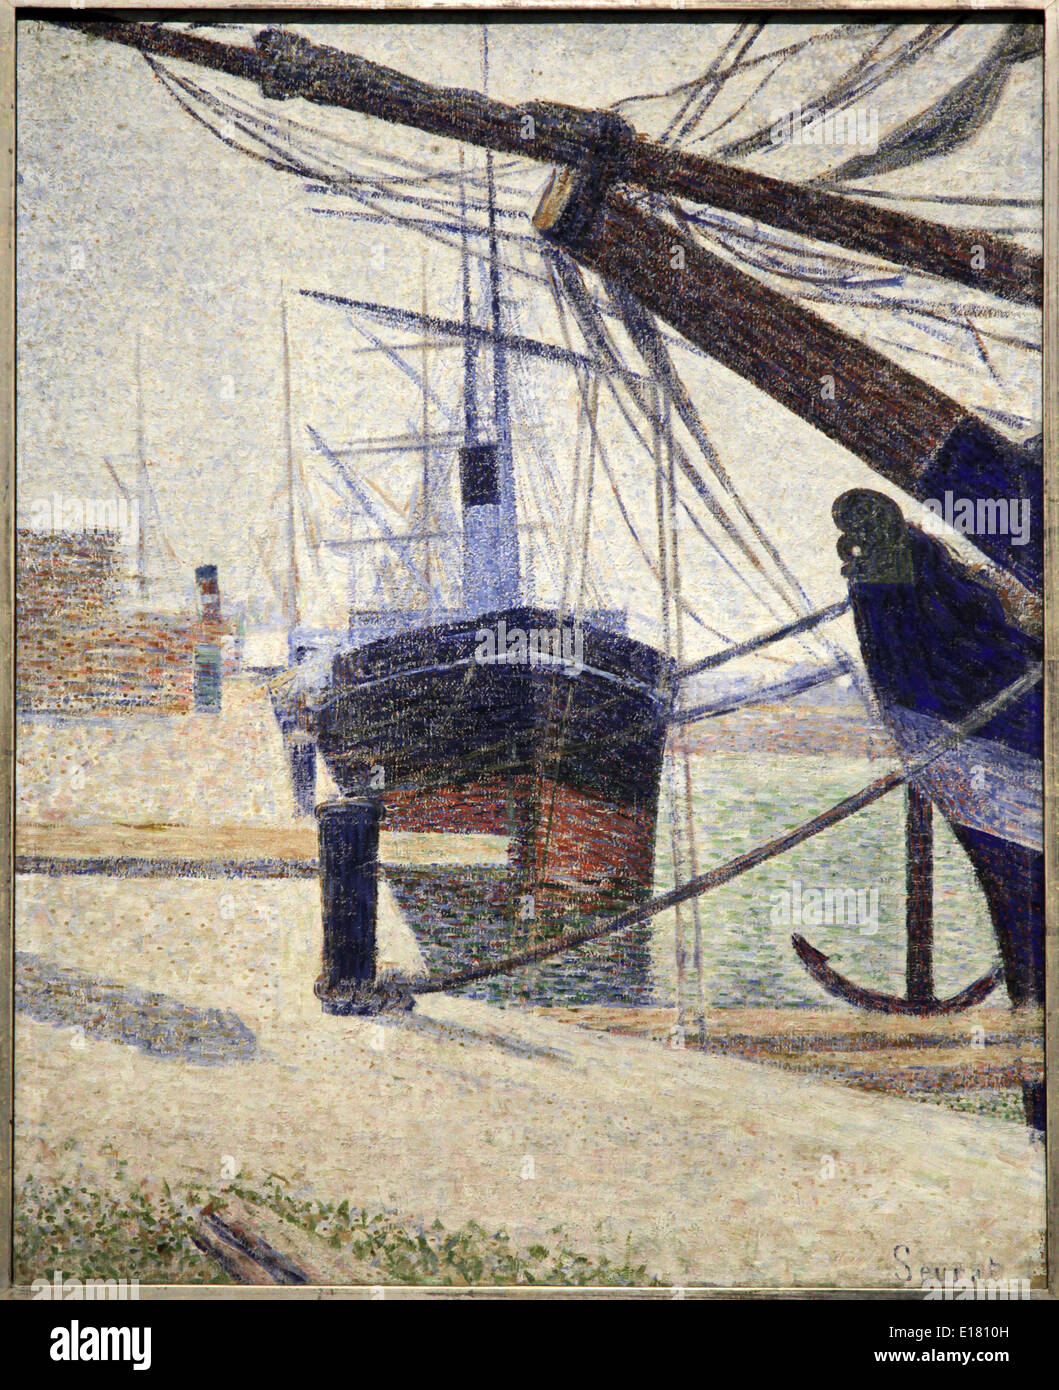 Georges-Pierre Seurat 1859-1891 French Post-Impressionist painter and draftsman.Georges Seurat.Corner of the Harbor of Honfleur Stock Photo